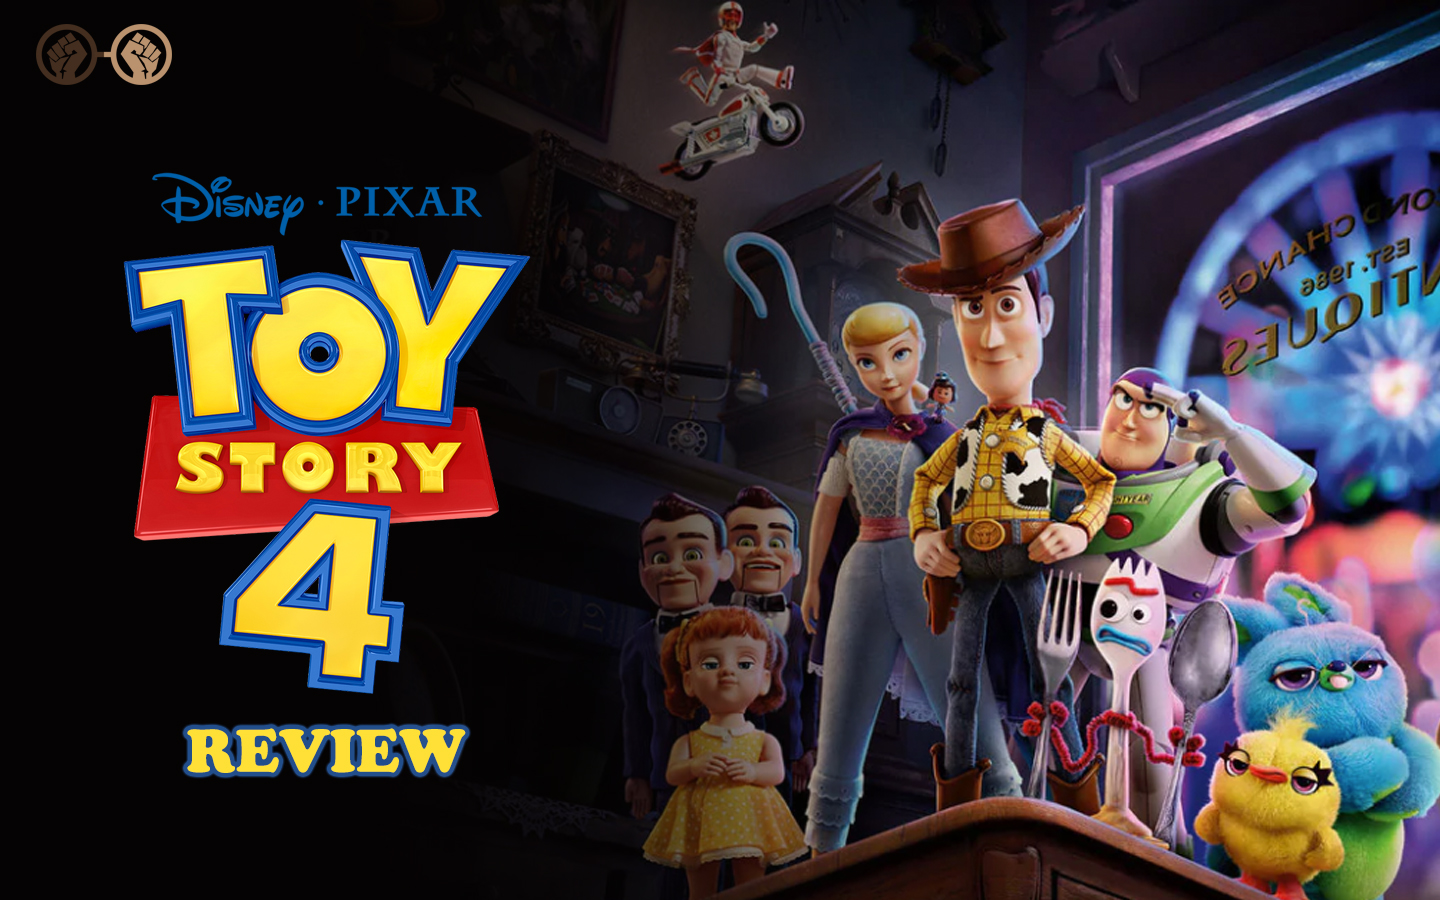 ‘Toy Story 4’ is a Heartwarming and Hilarious Addition to the Franchise – Review